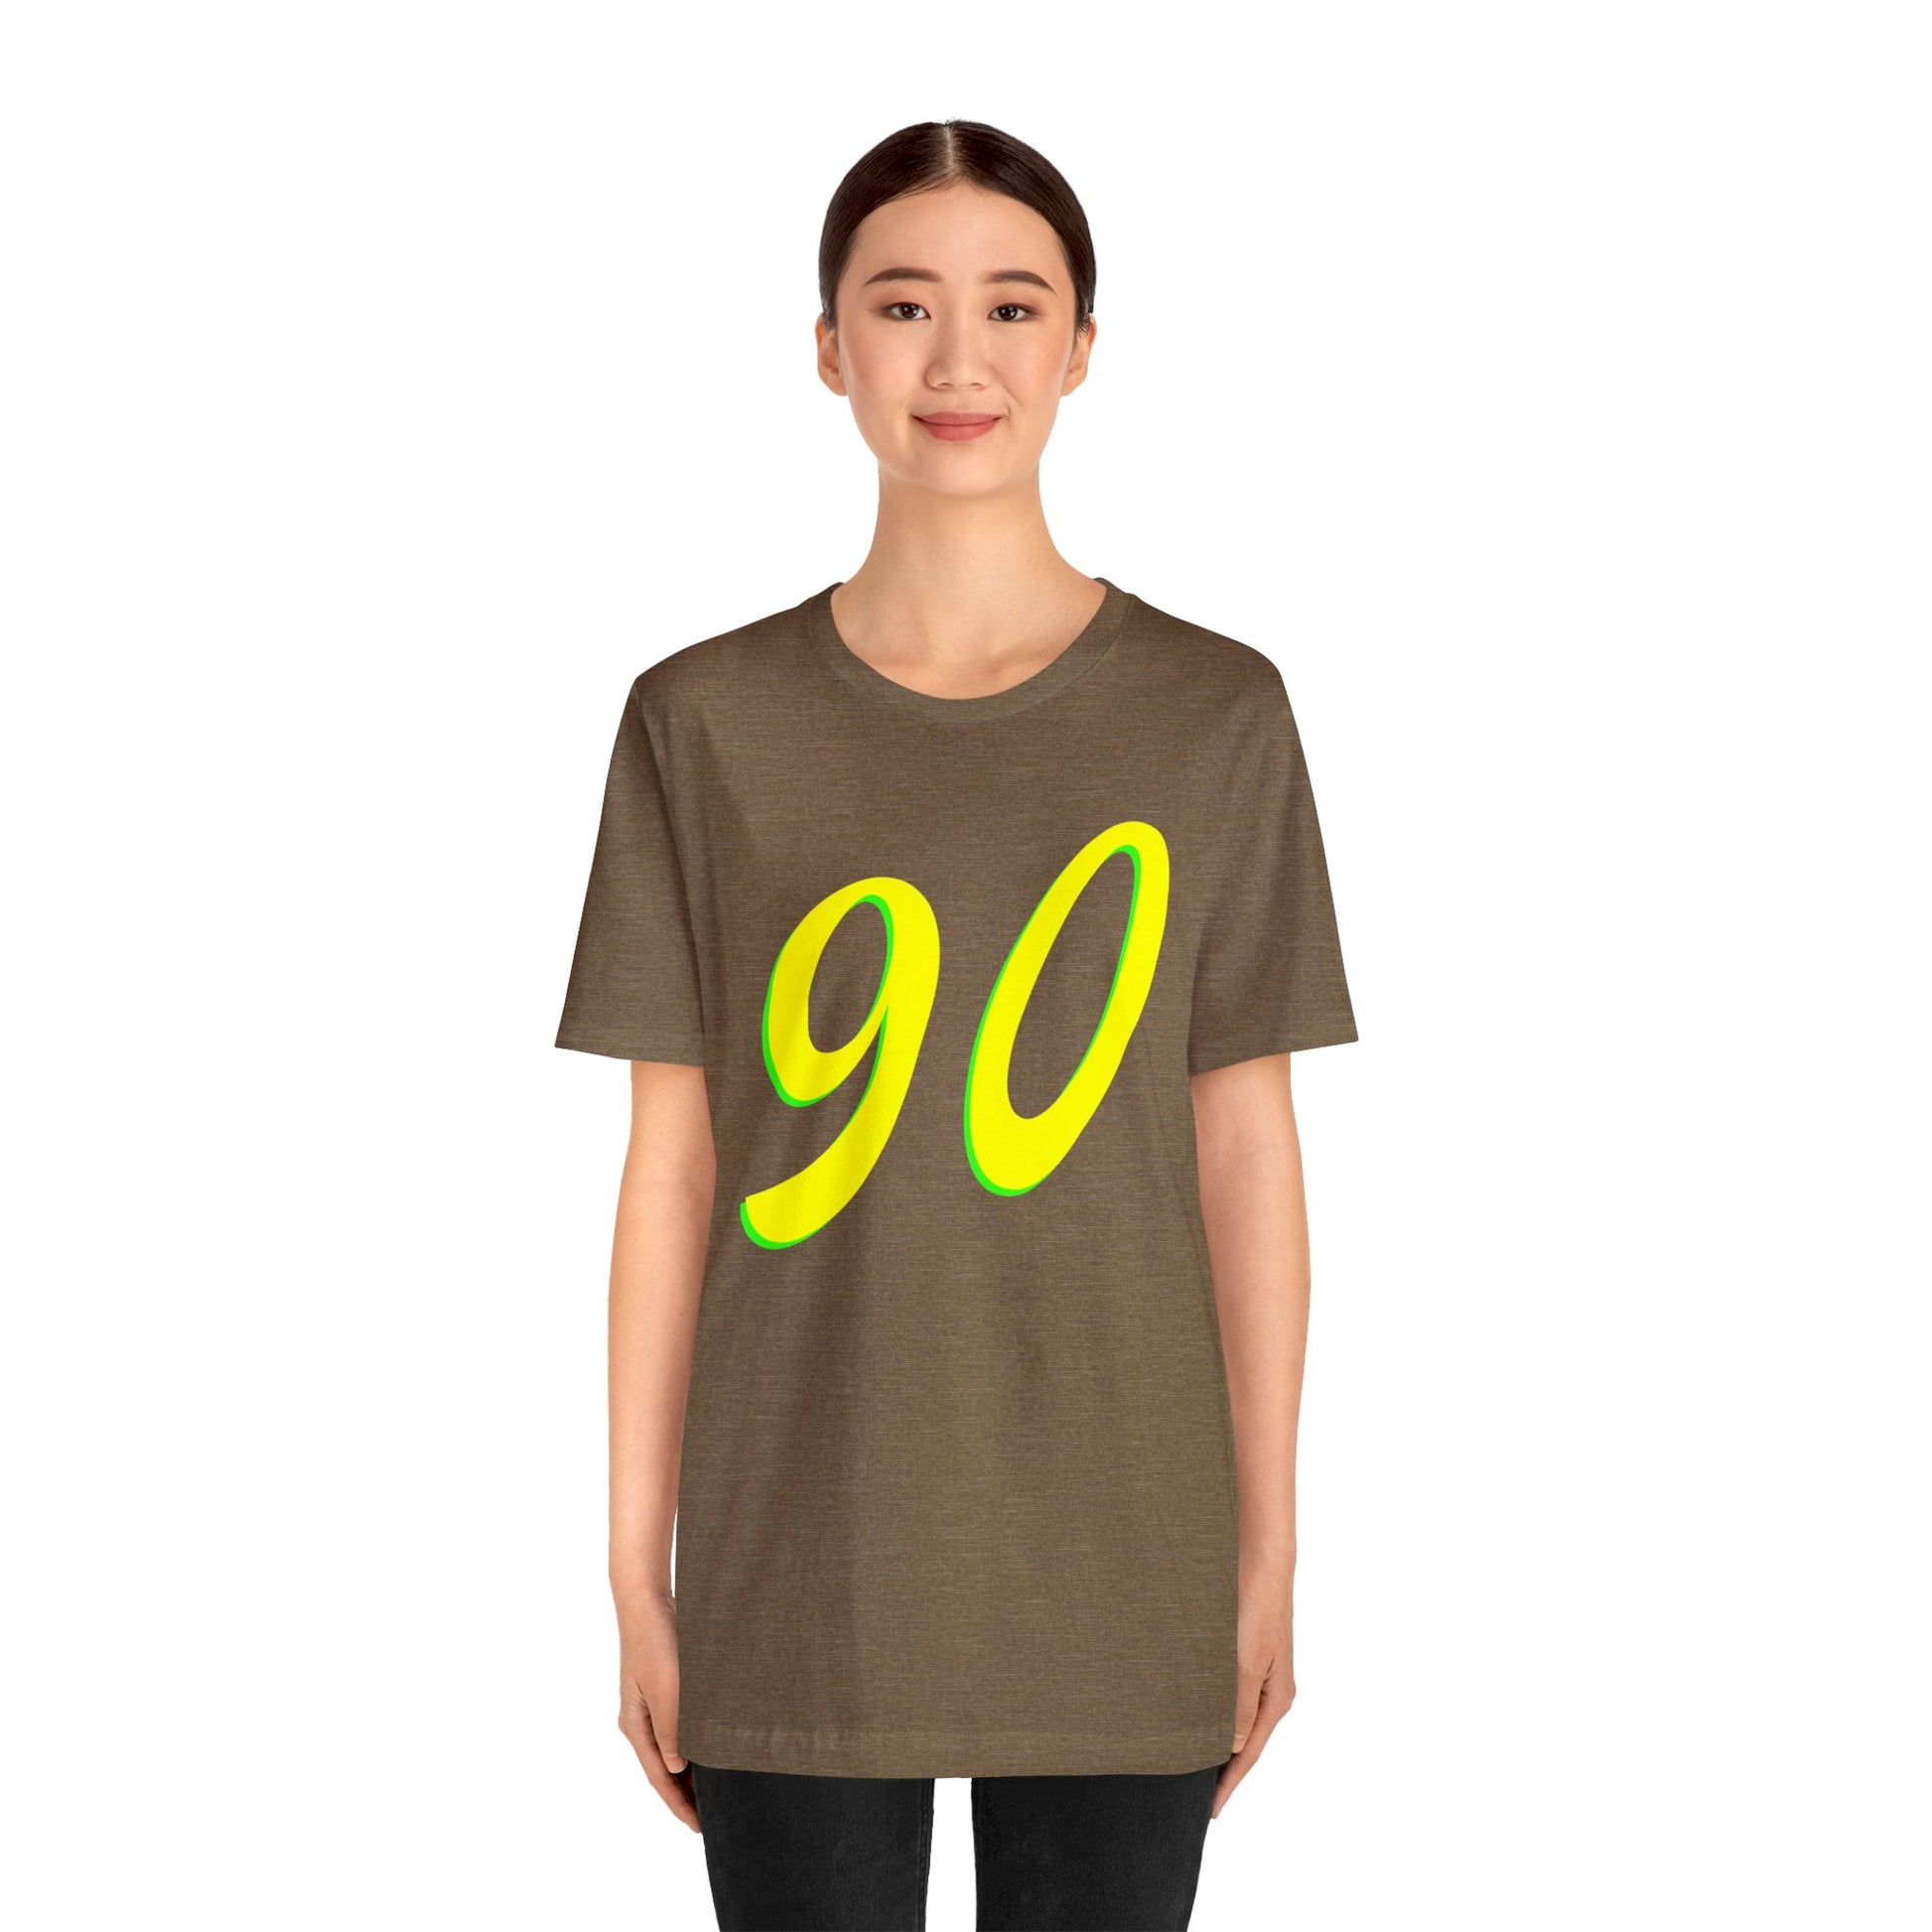 Number 90 Design - Soft Cotton Tee for birthdays and celebrations, Gift for friends and family, Multiple Options by clothezy.com in Dark Grey Heather Size Medium - Buy Now